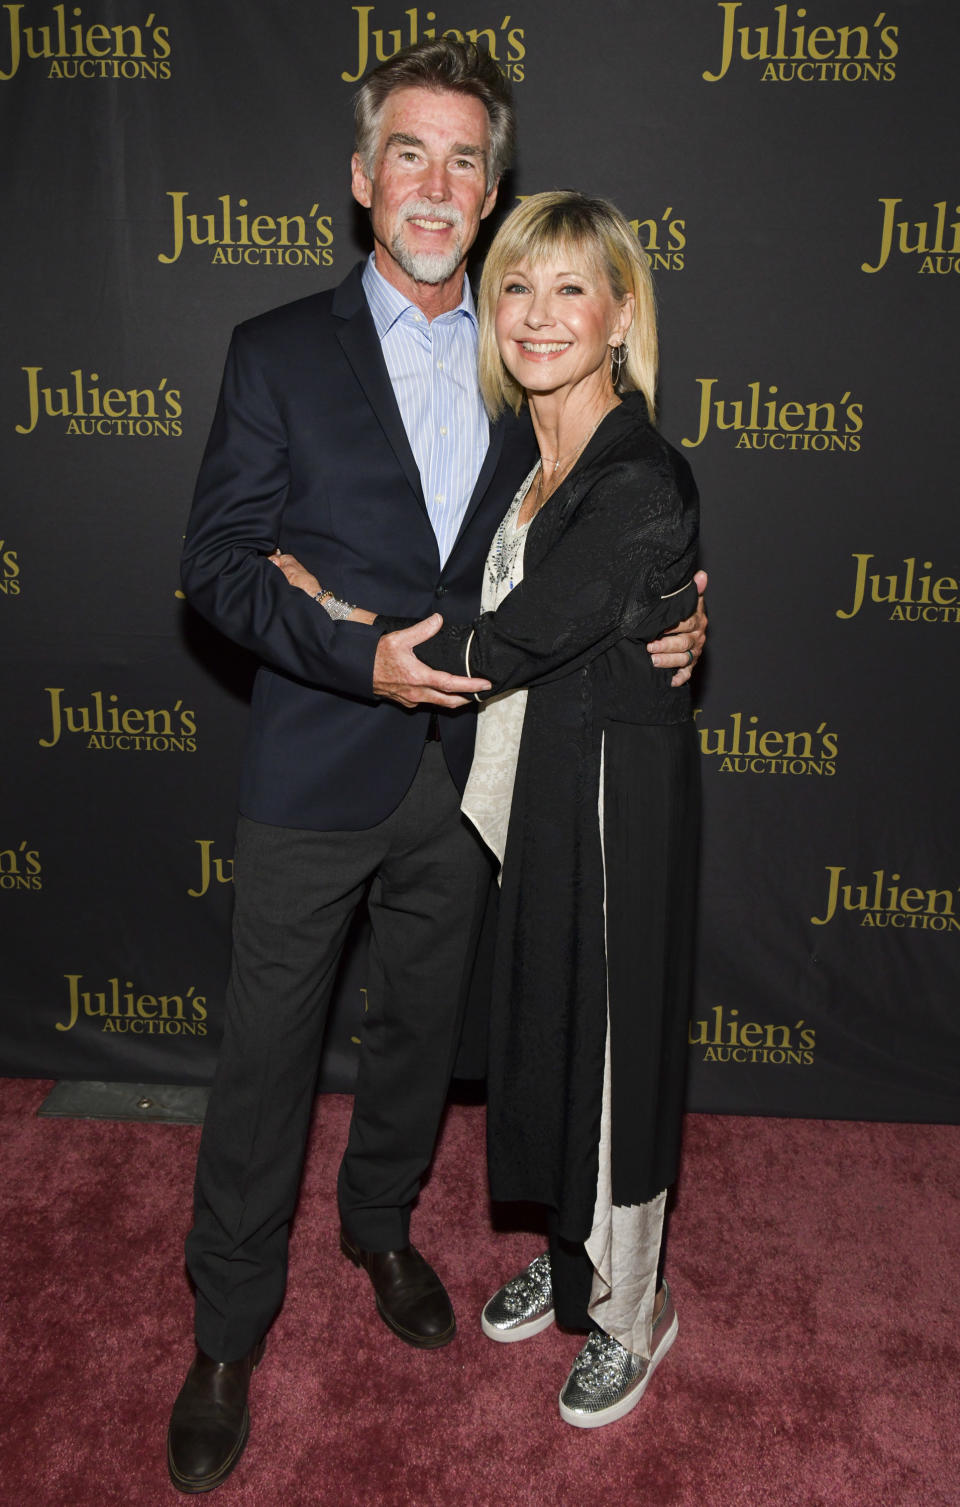 Olivia Newton-John and John Easterling pose at a VIP reception for the Property of Olivia Newton-John Auction Event at Julien's Auctions in 2019